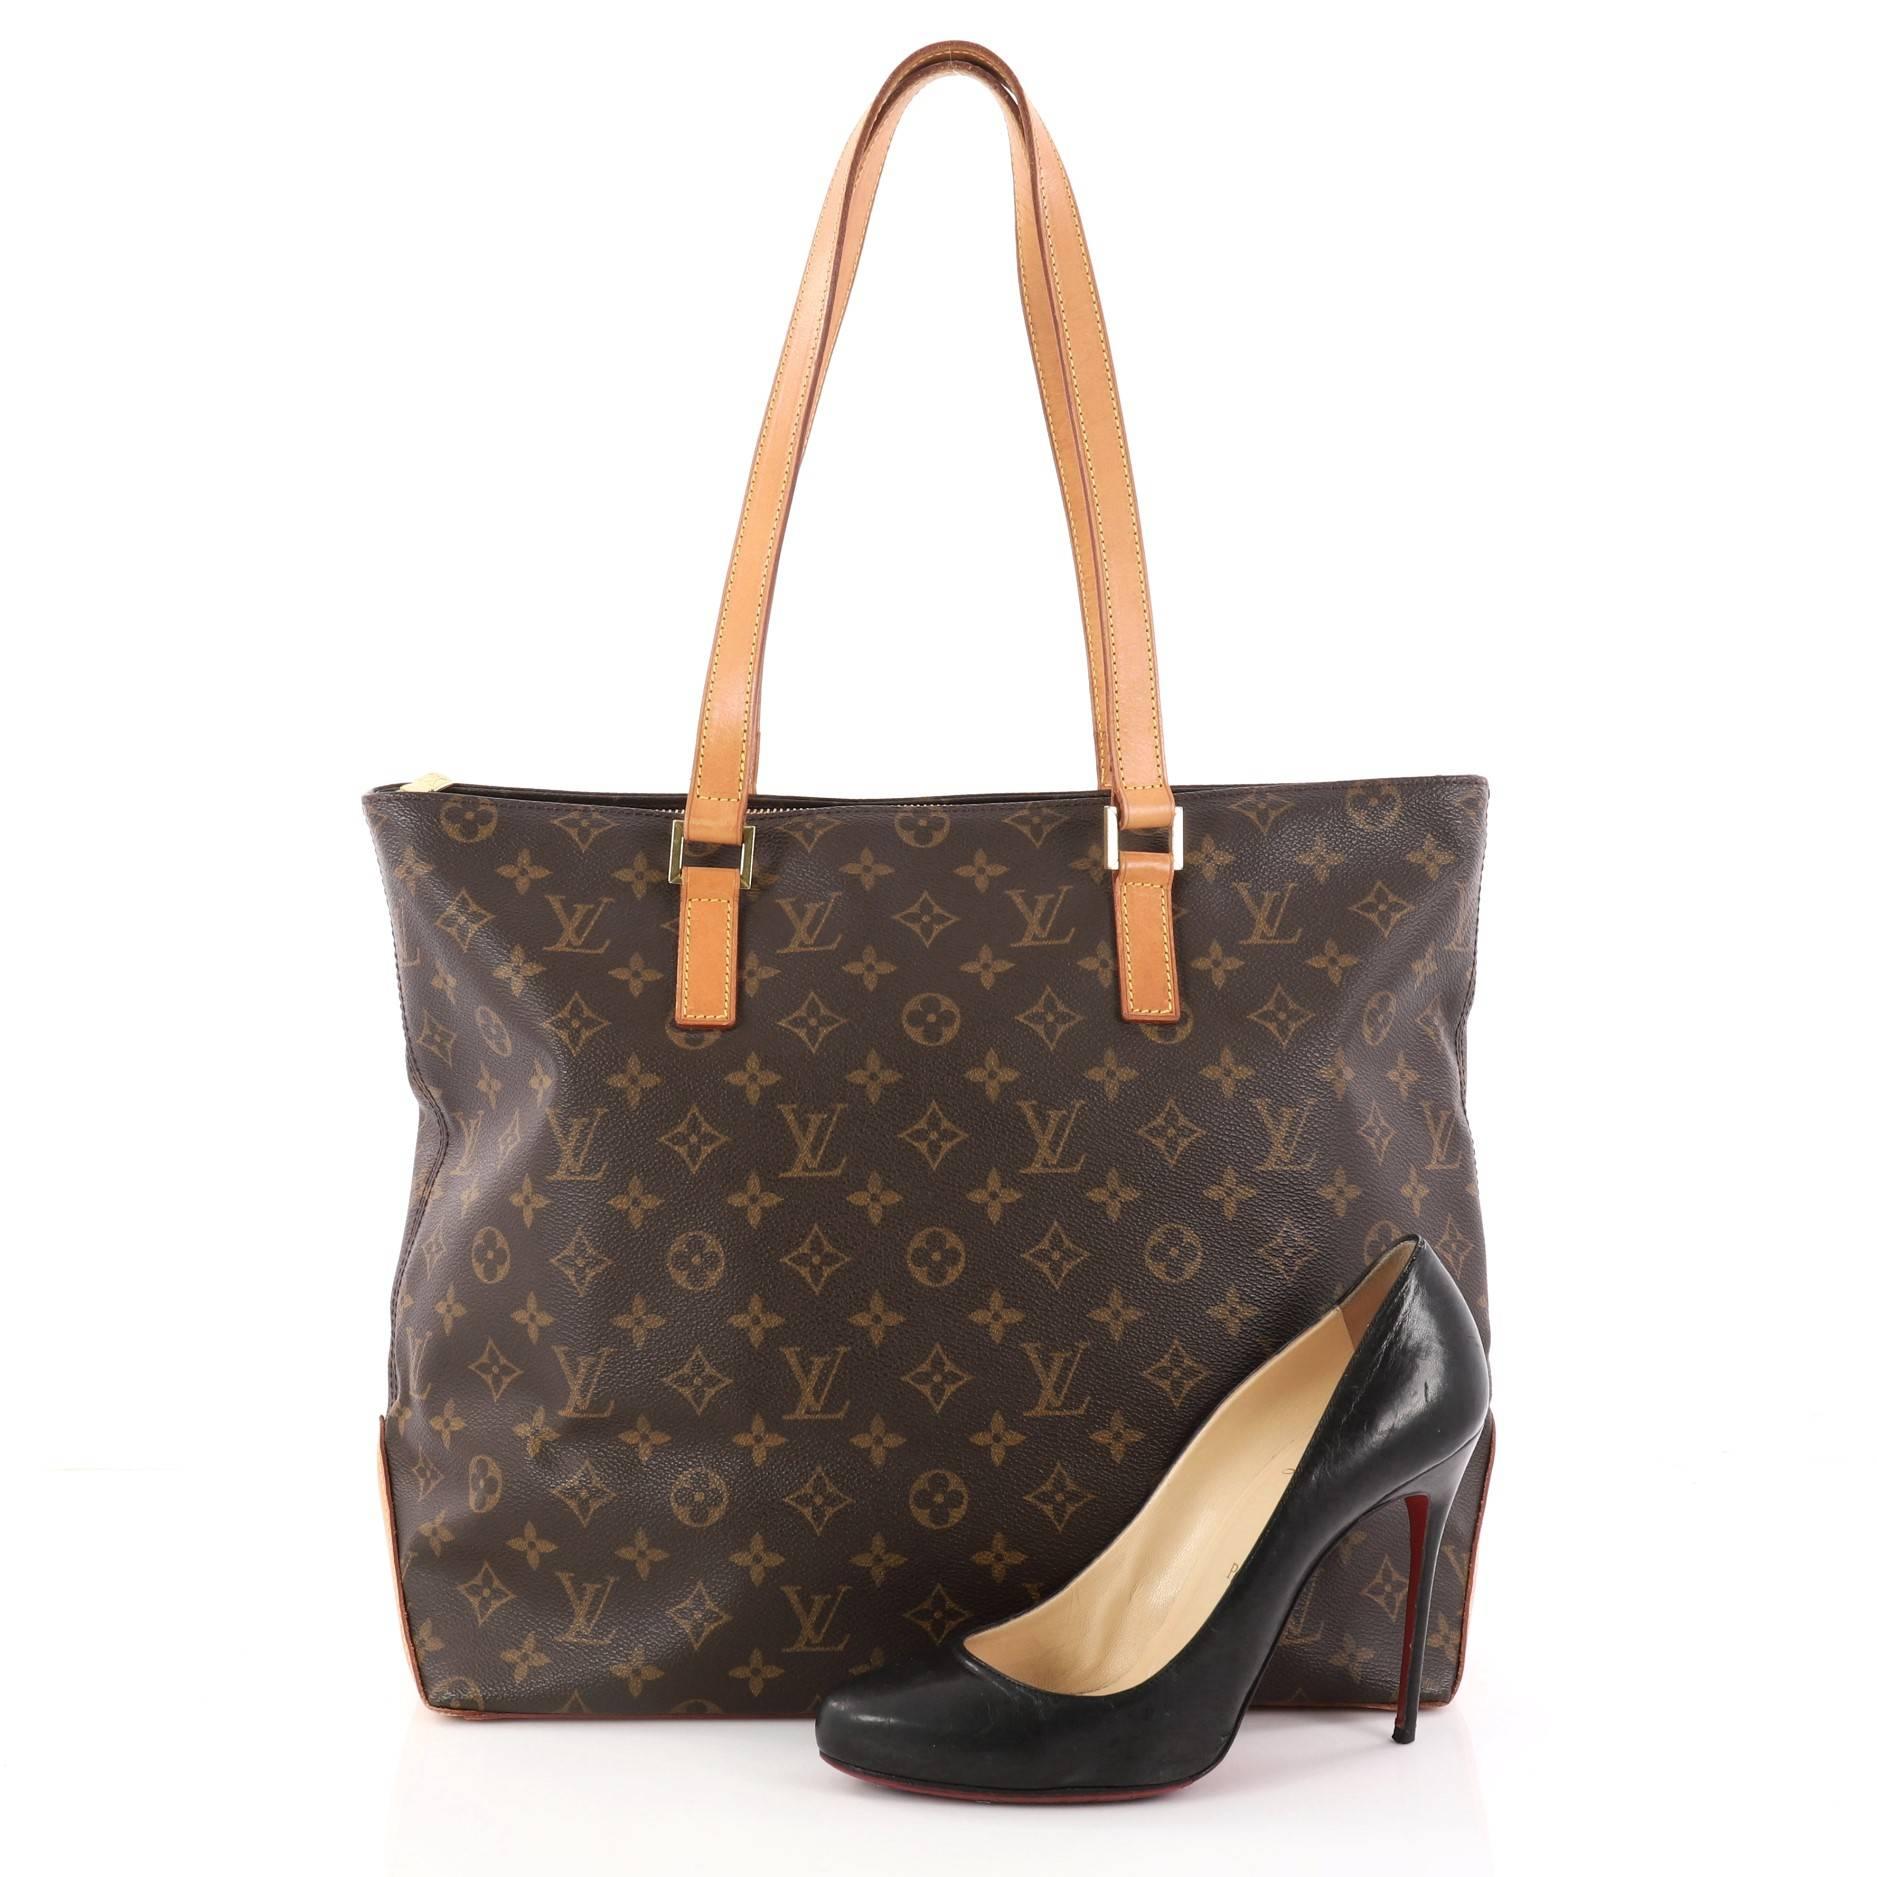 This authentic Louis Vuitton Cabas Mezzo Monogram Canvas is a marvelous tote that is ideal for everyday use. Constructed from Louis Vuitton's monogram coated canvas, this chic city tote features vachetta cowhide leather handles and base, and